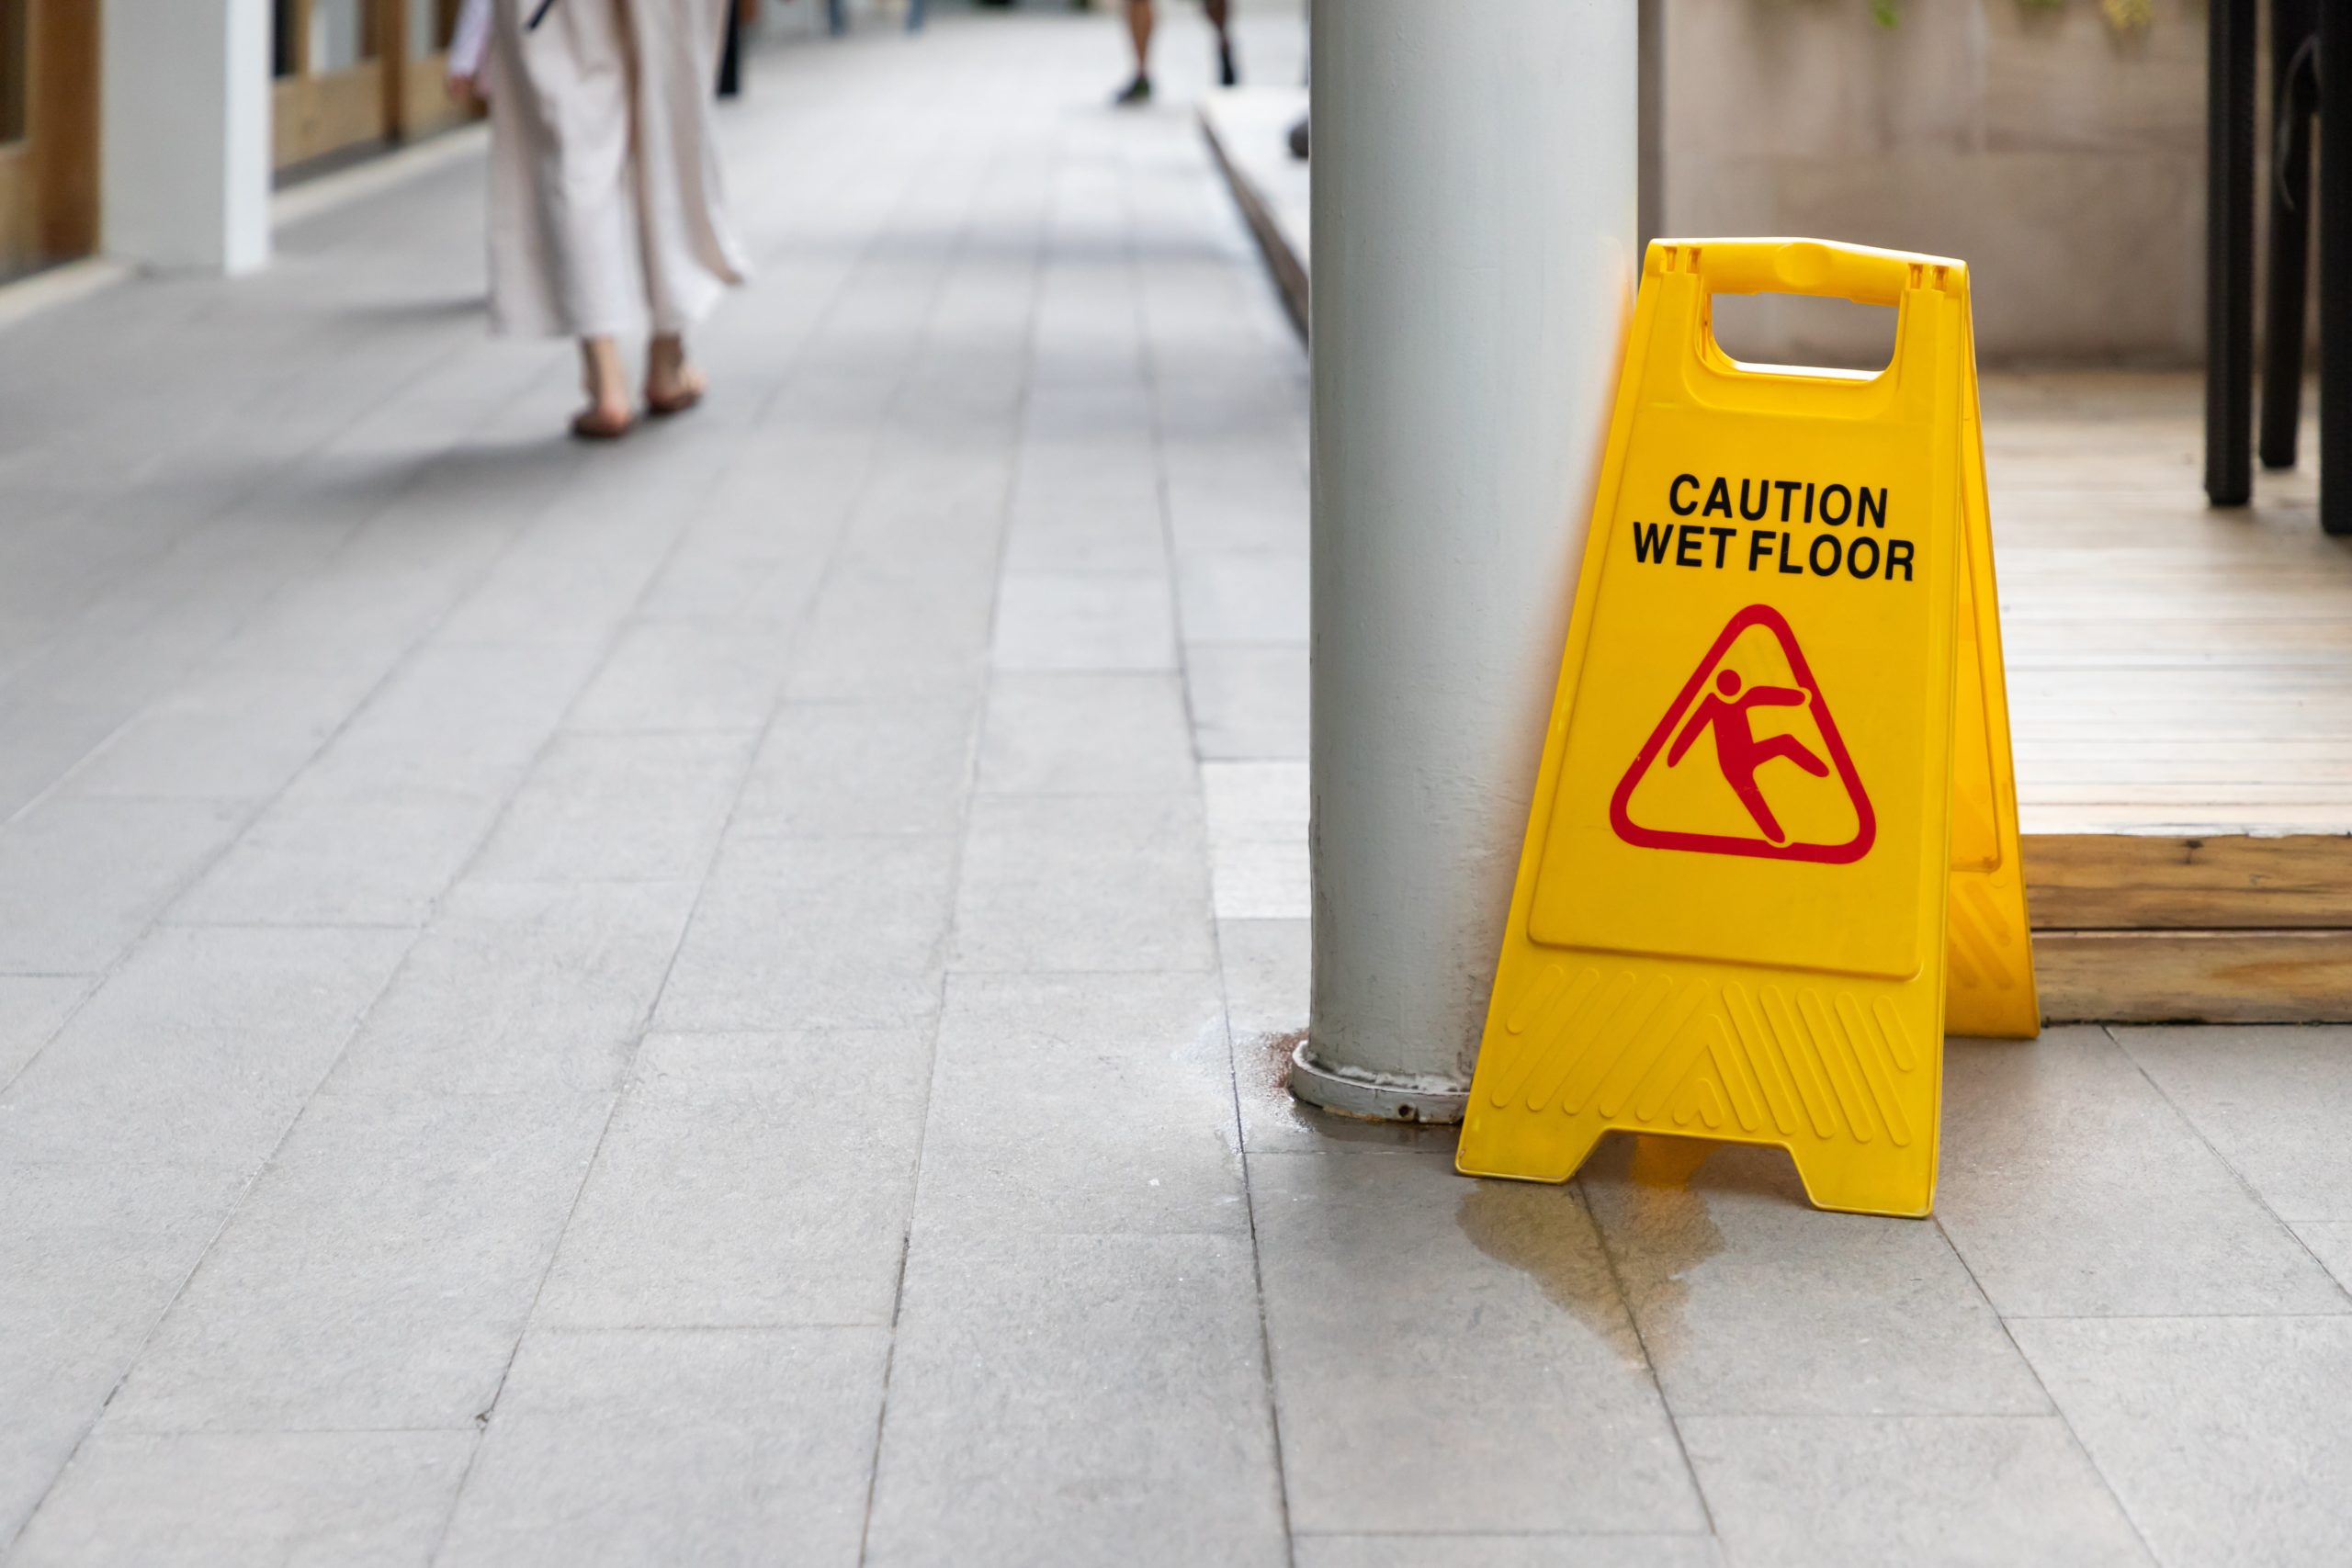  slip and fall causes